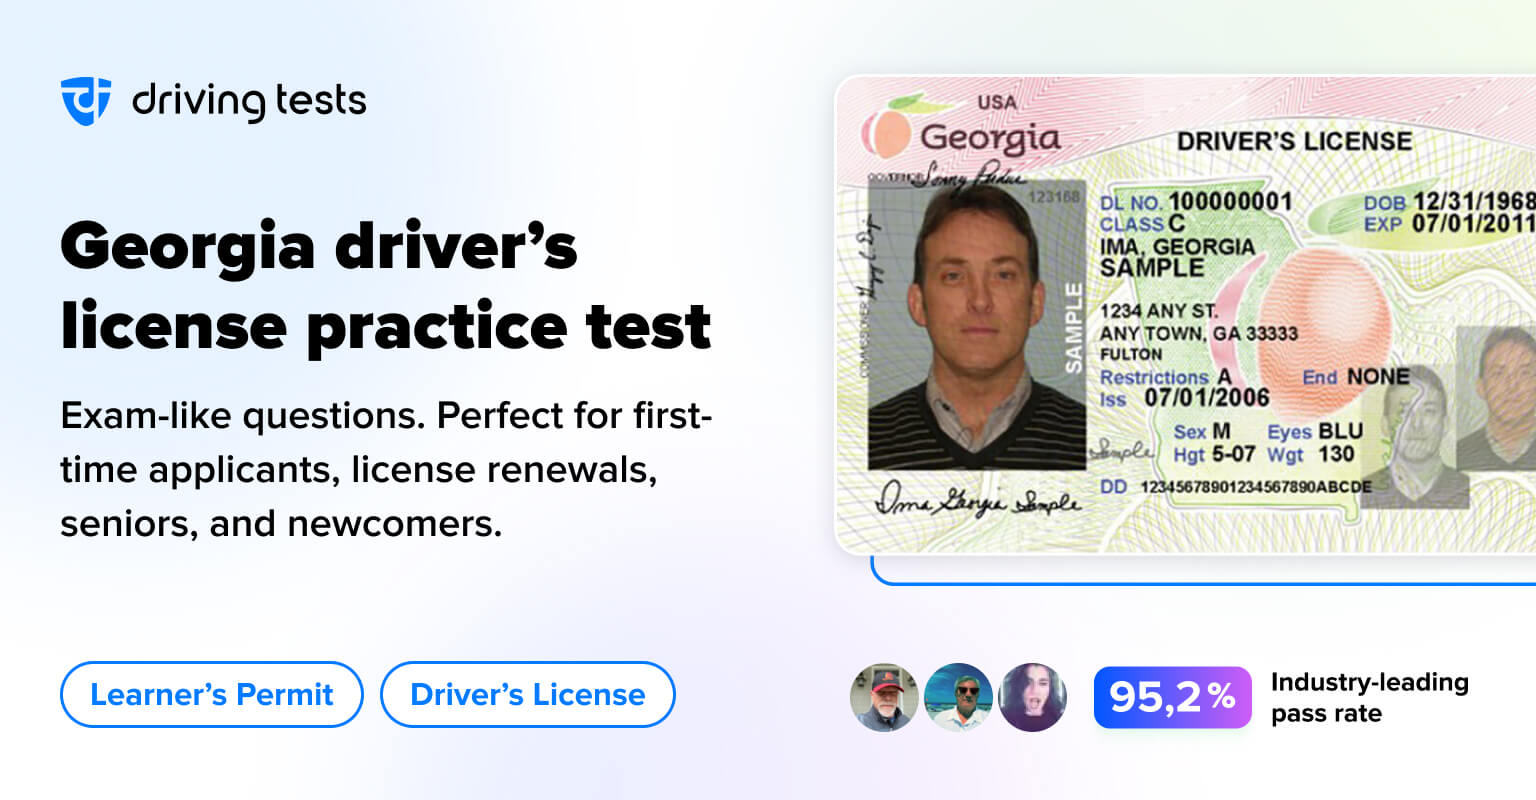 20,000 Georgia Kids Got Driver's License without Taking Road Test